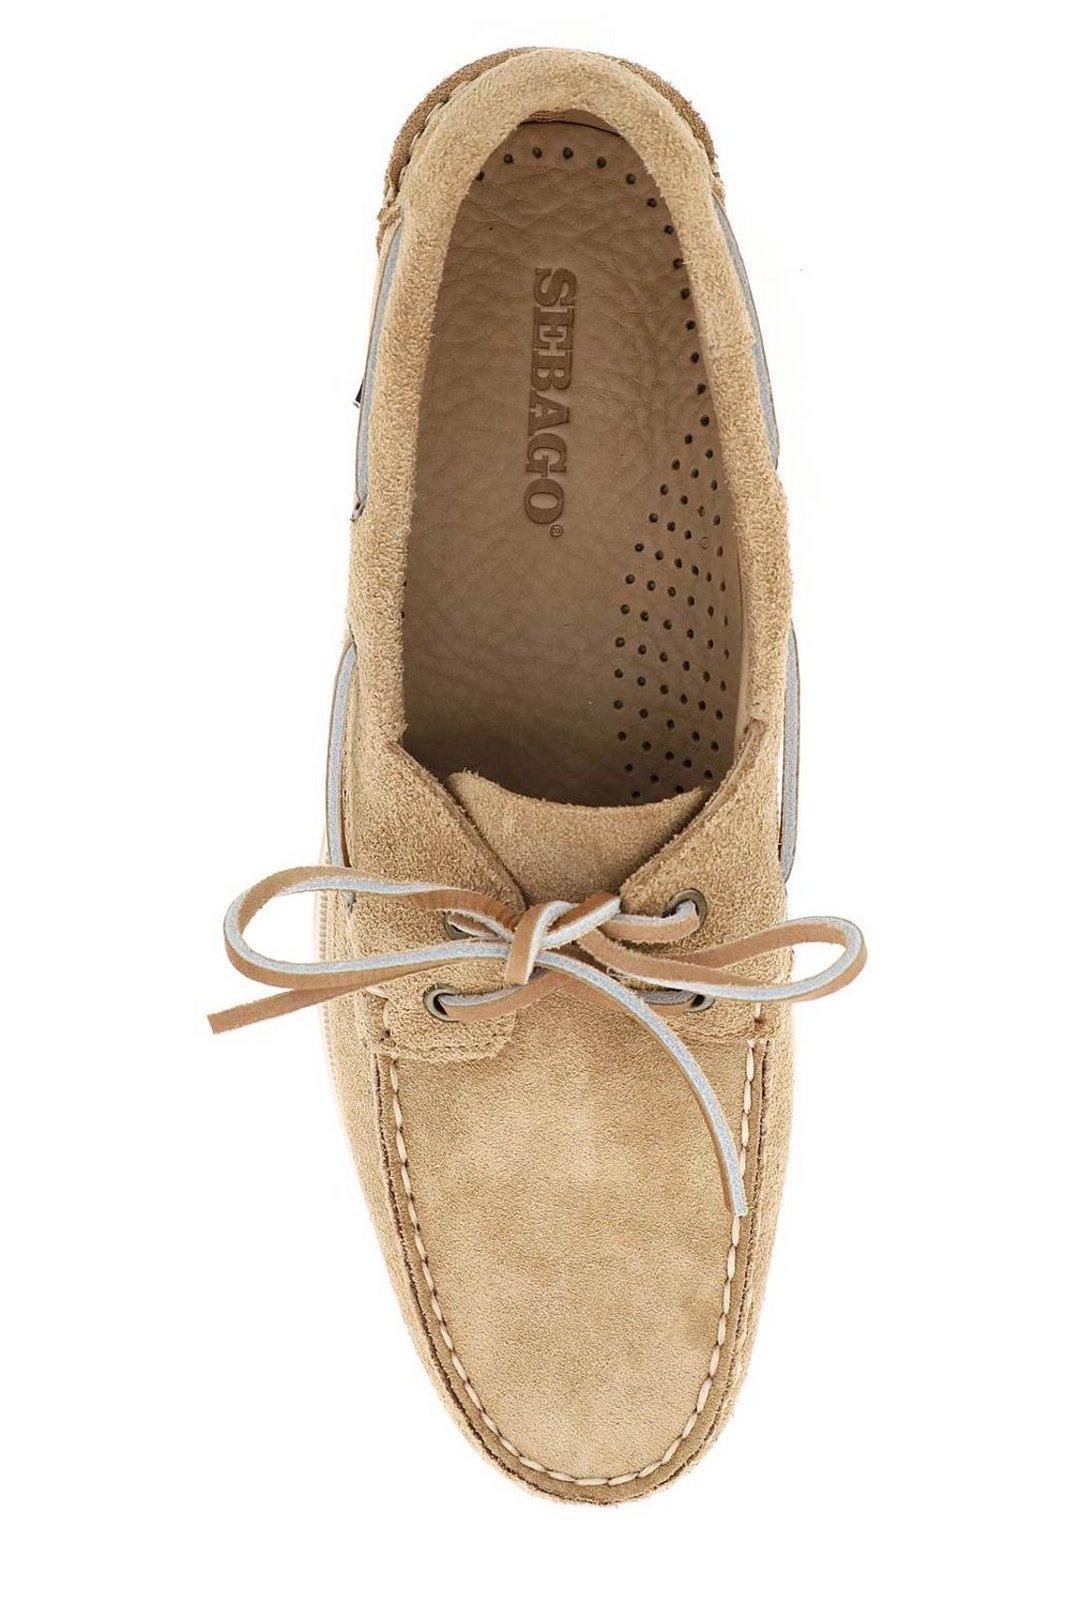 Shop Sebago Lace-up Round Toe Boat Shoes In Beige Camel